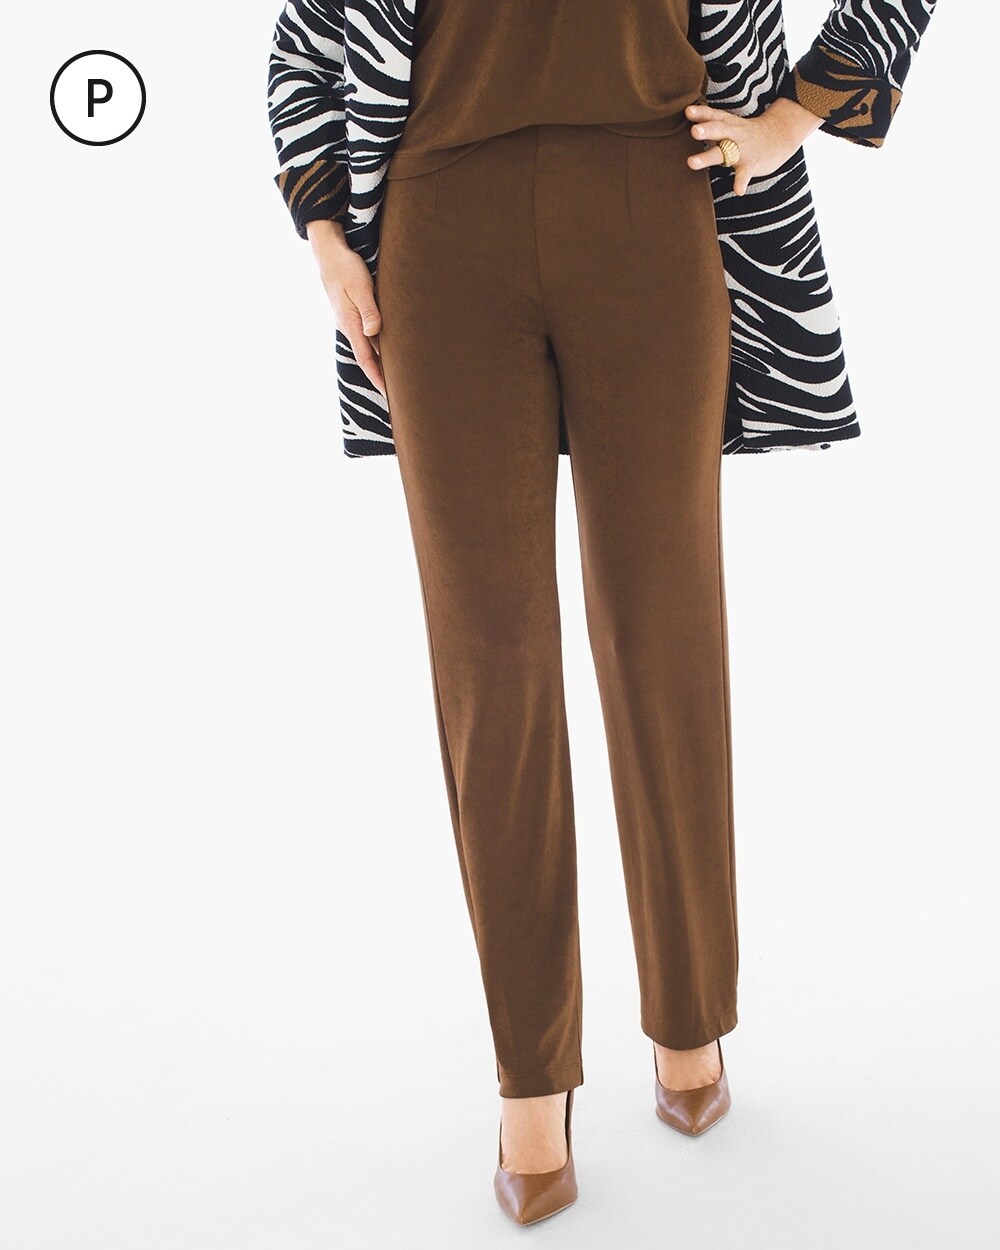 Travelers Classic Petite No Tummy Pants in Chestnut